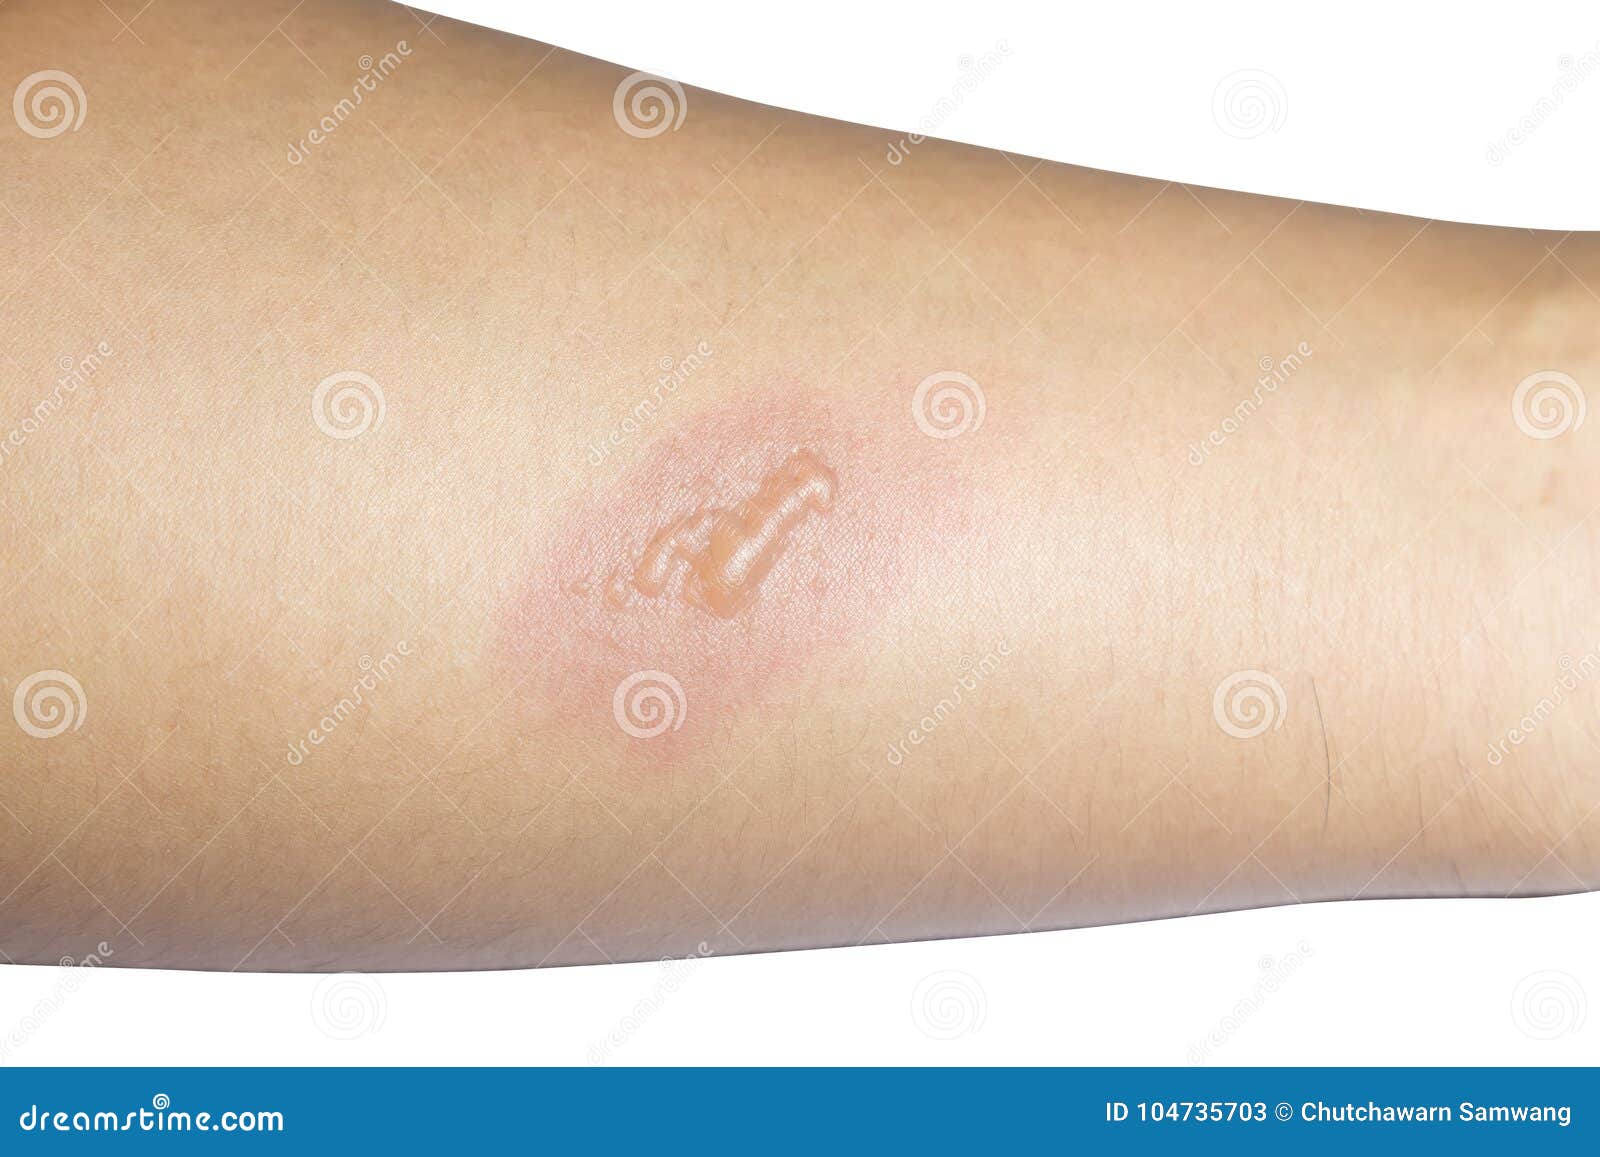 arm with blister or burn skin